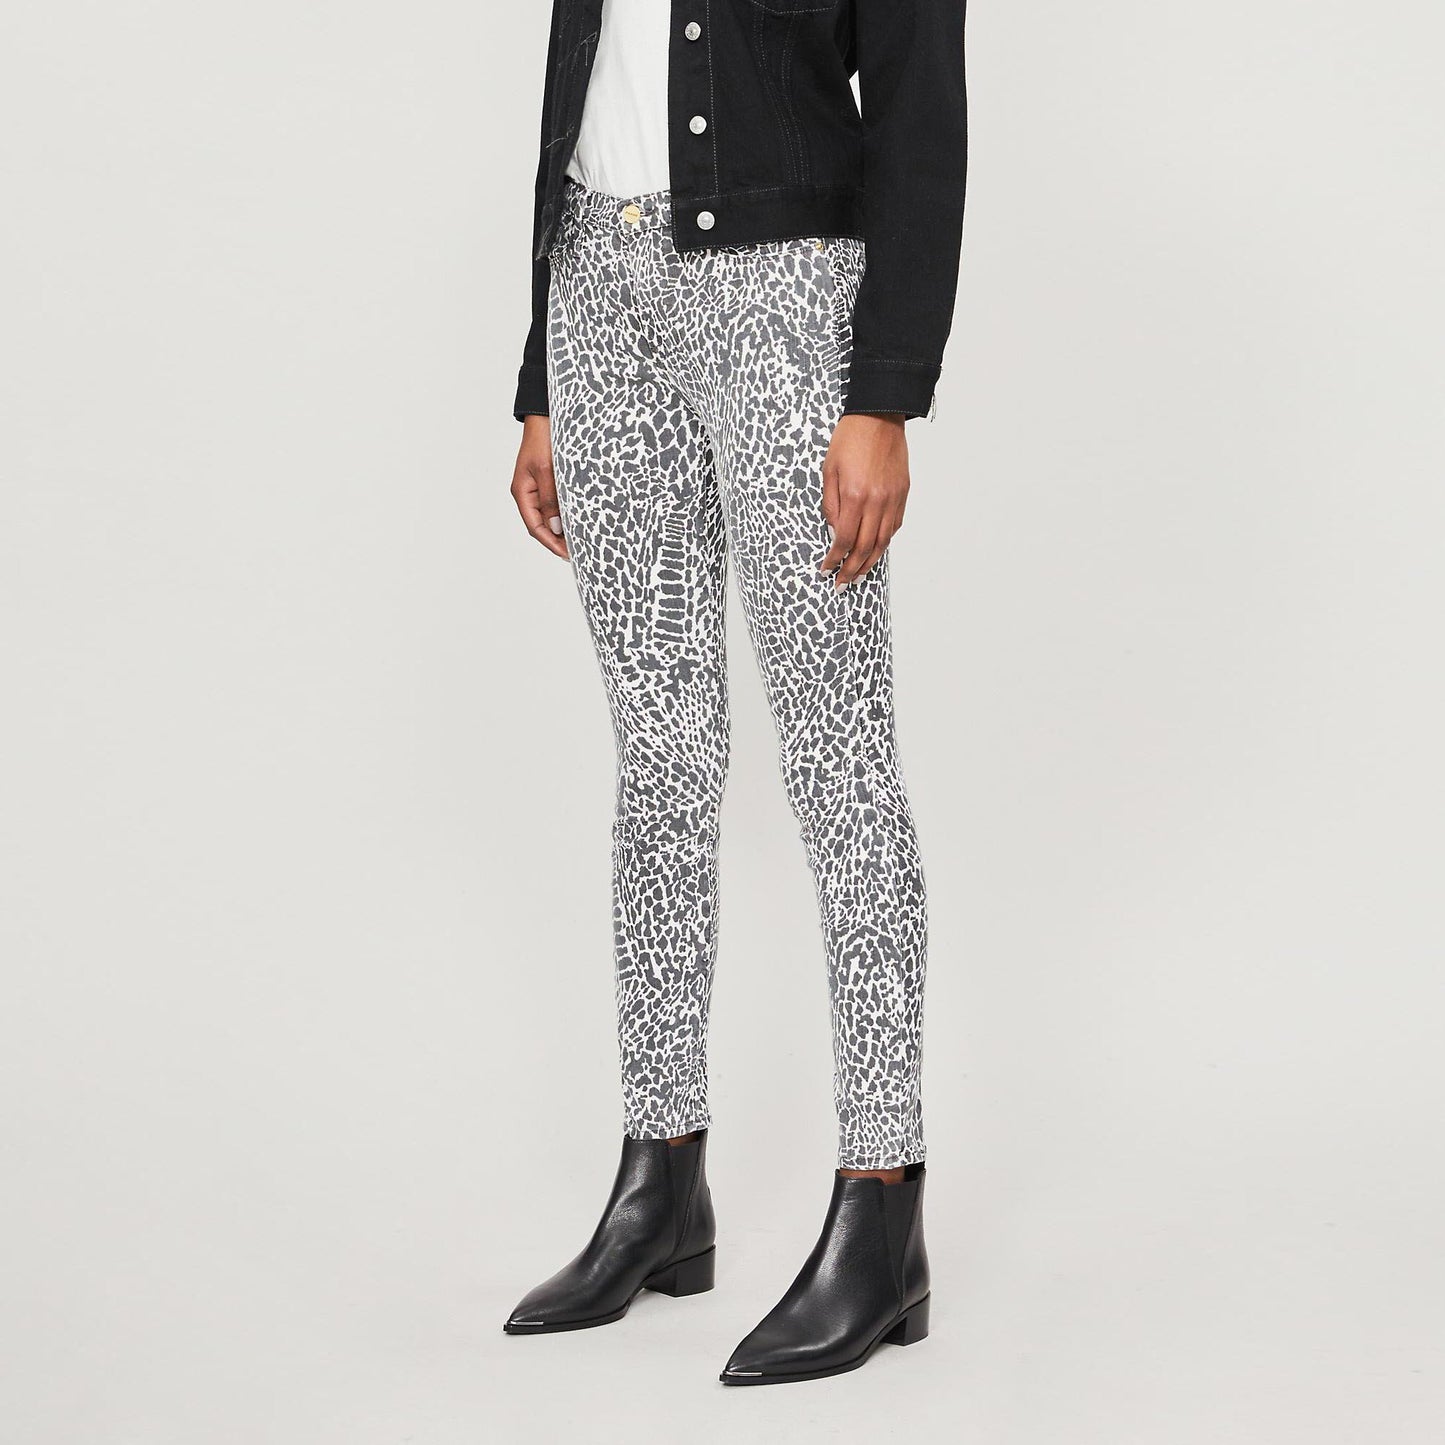 frame le high skinny black and white leopard printed jeans - size 27